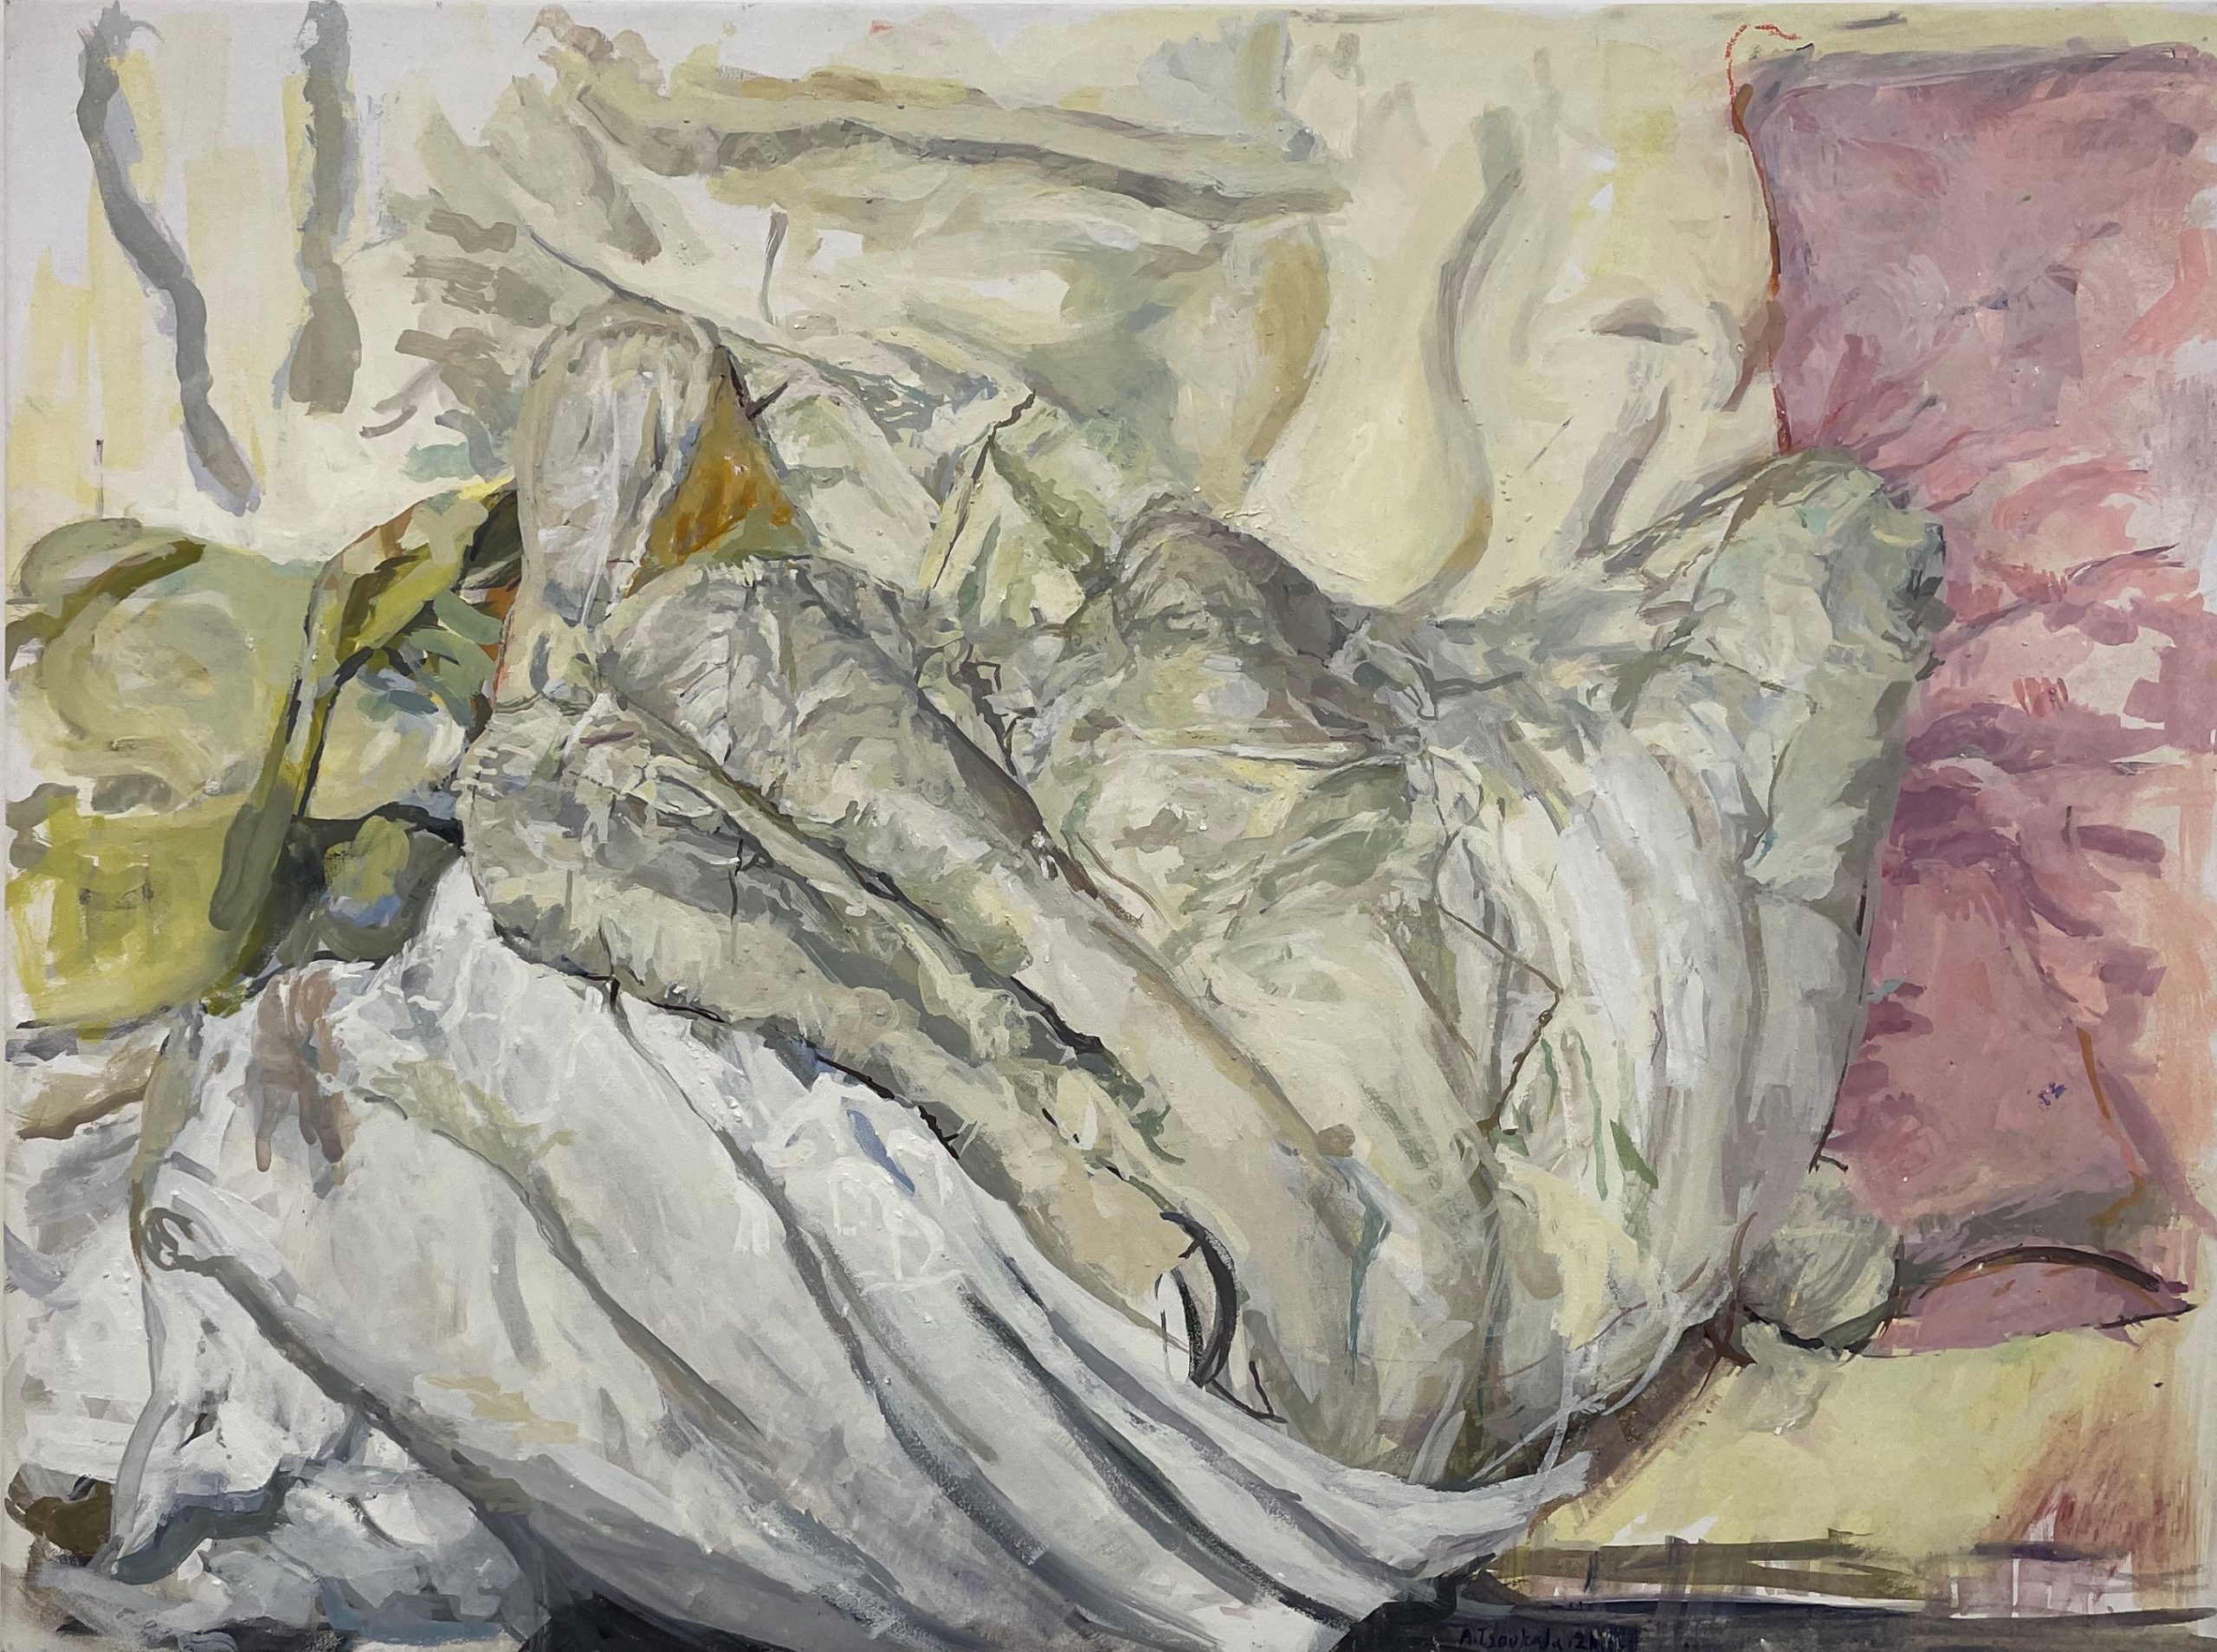 Bed, 2021 Egg tempera on canvas, 80 x 60 cm